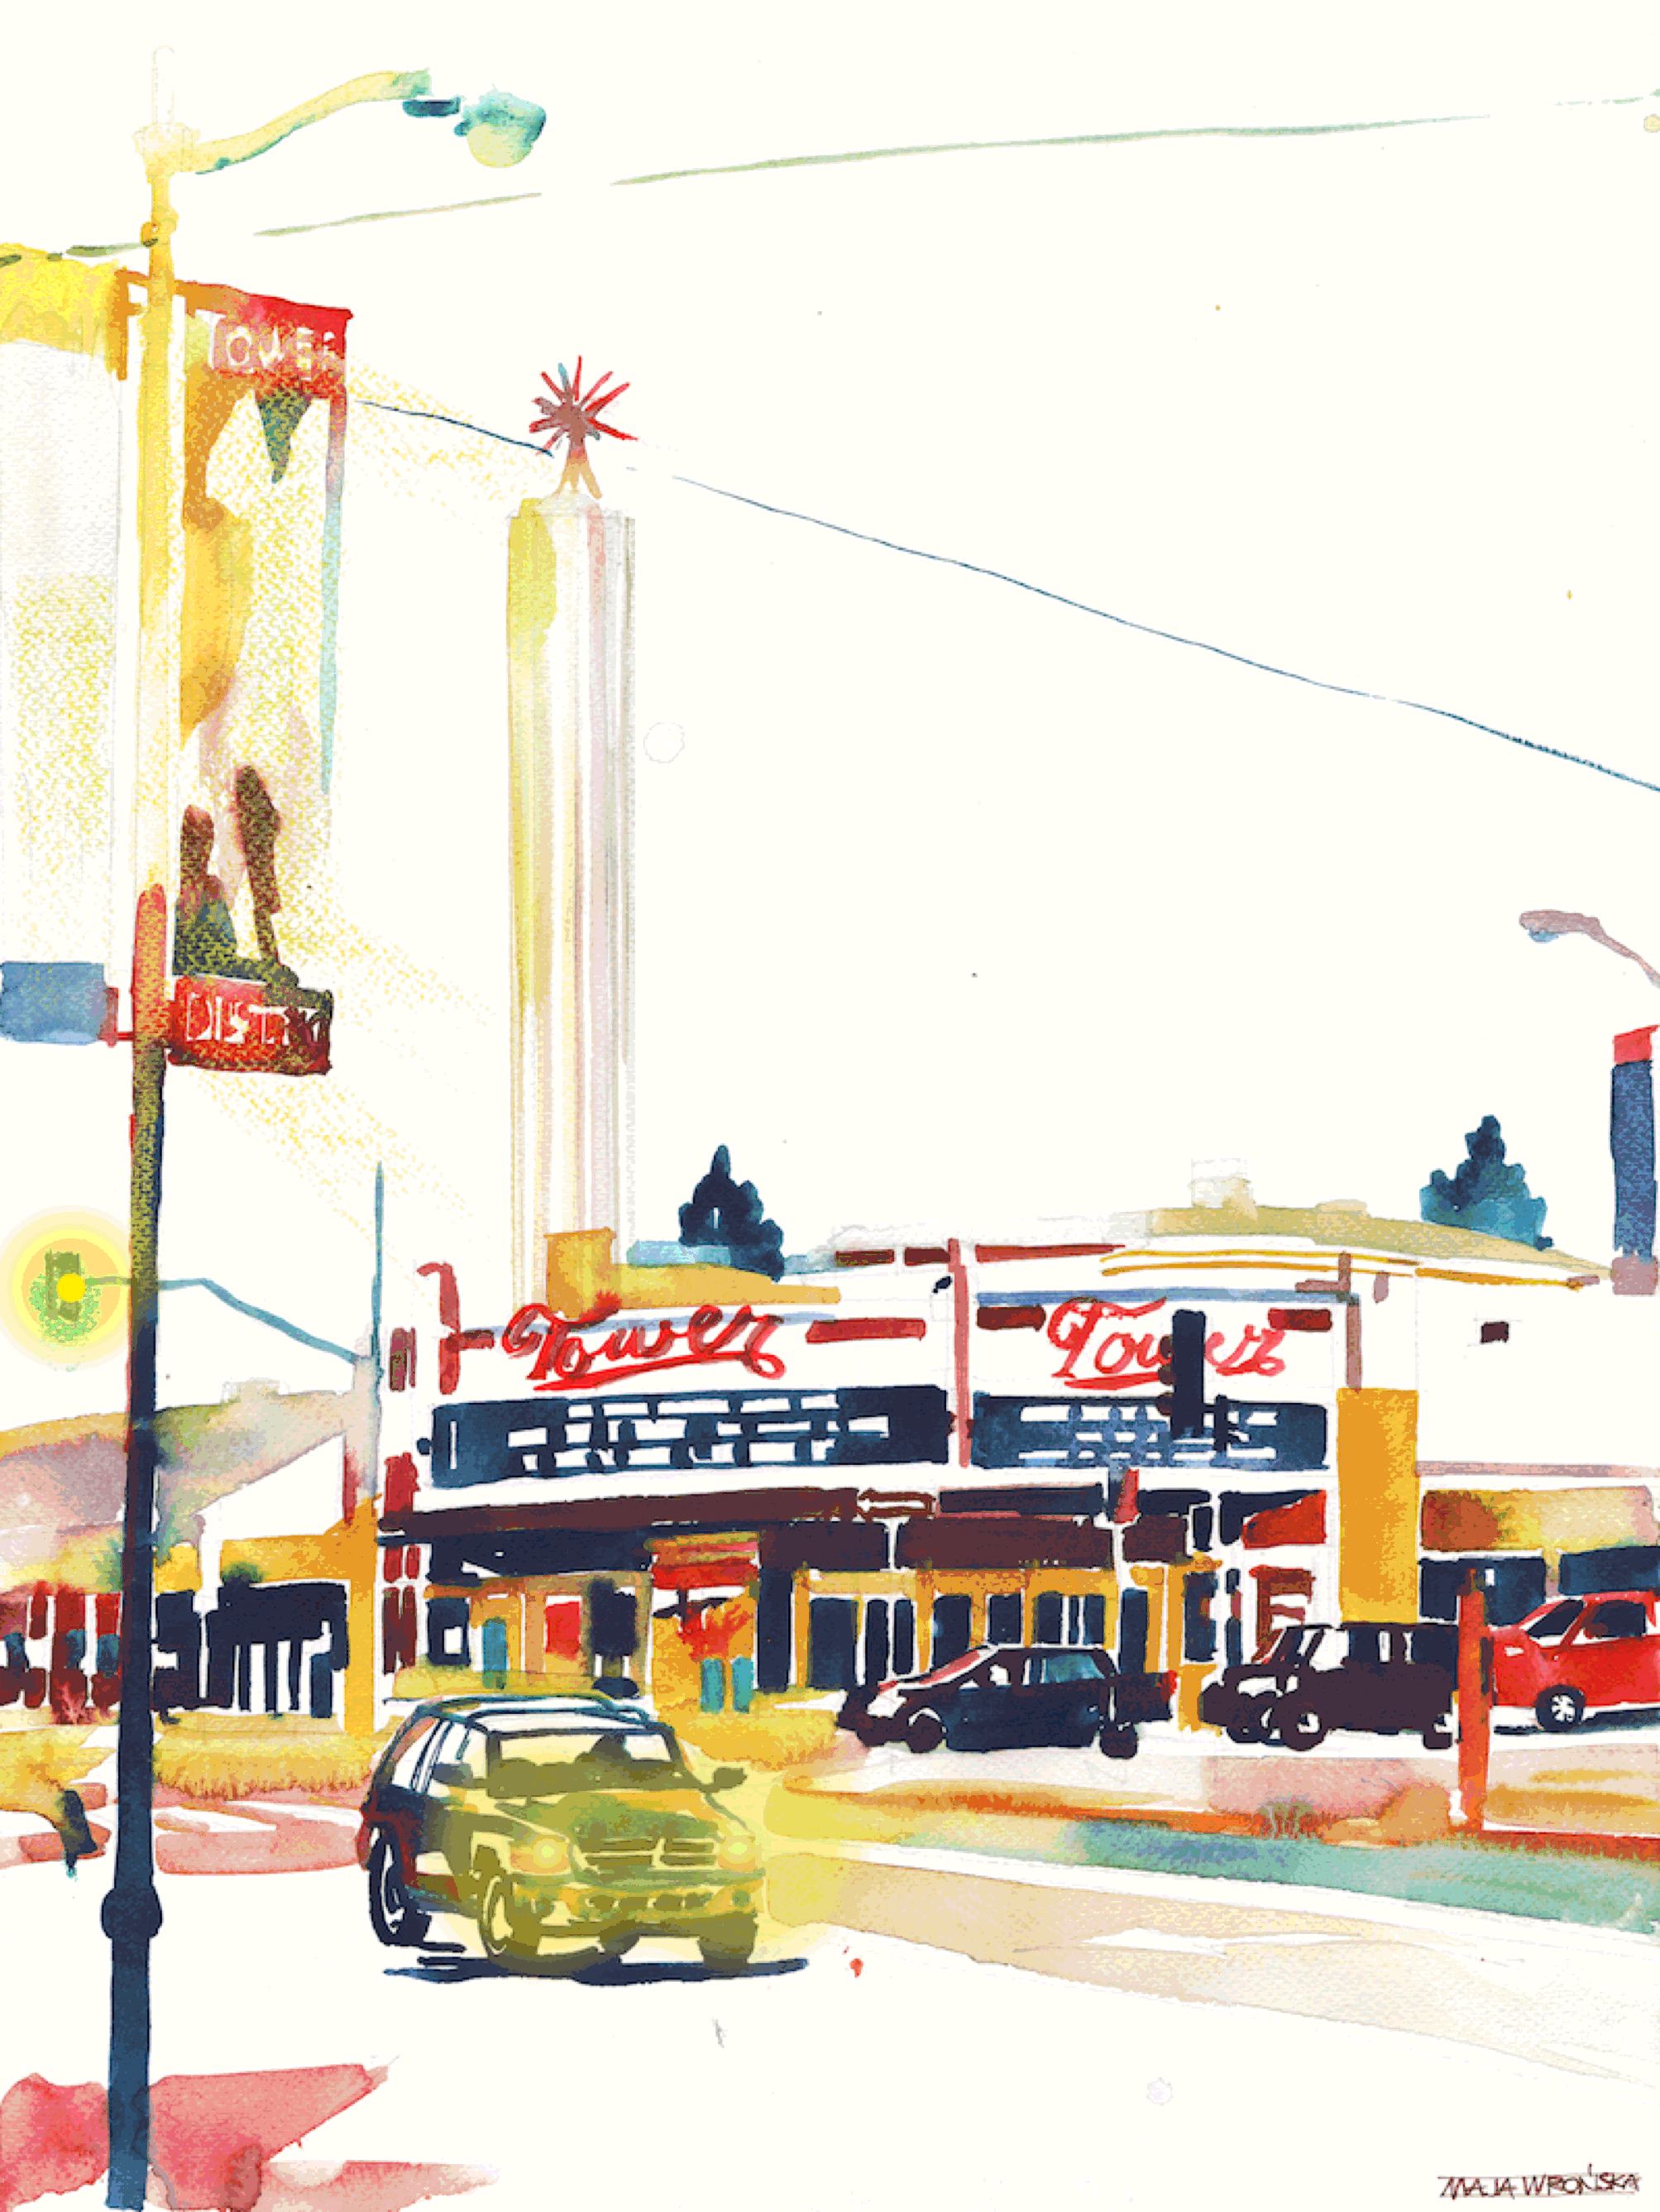 An animated version of the Tower Theater in Fresno